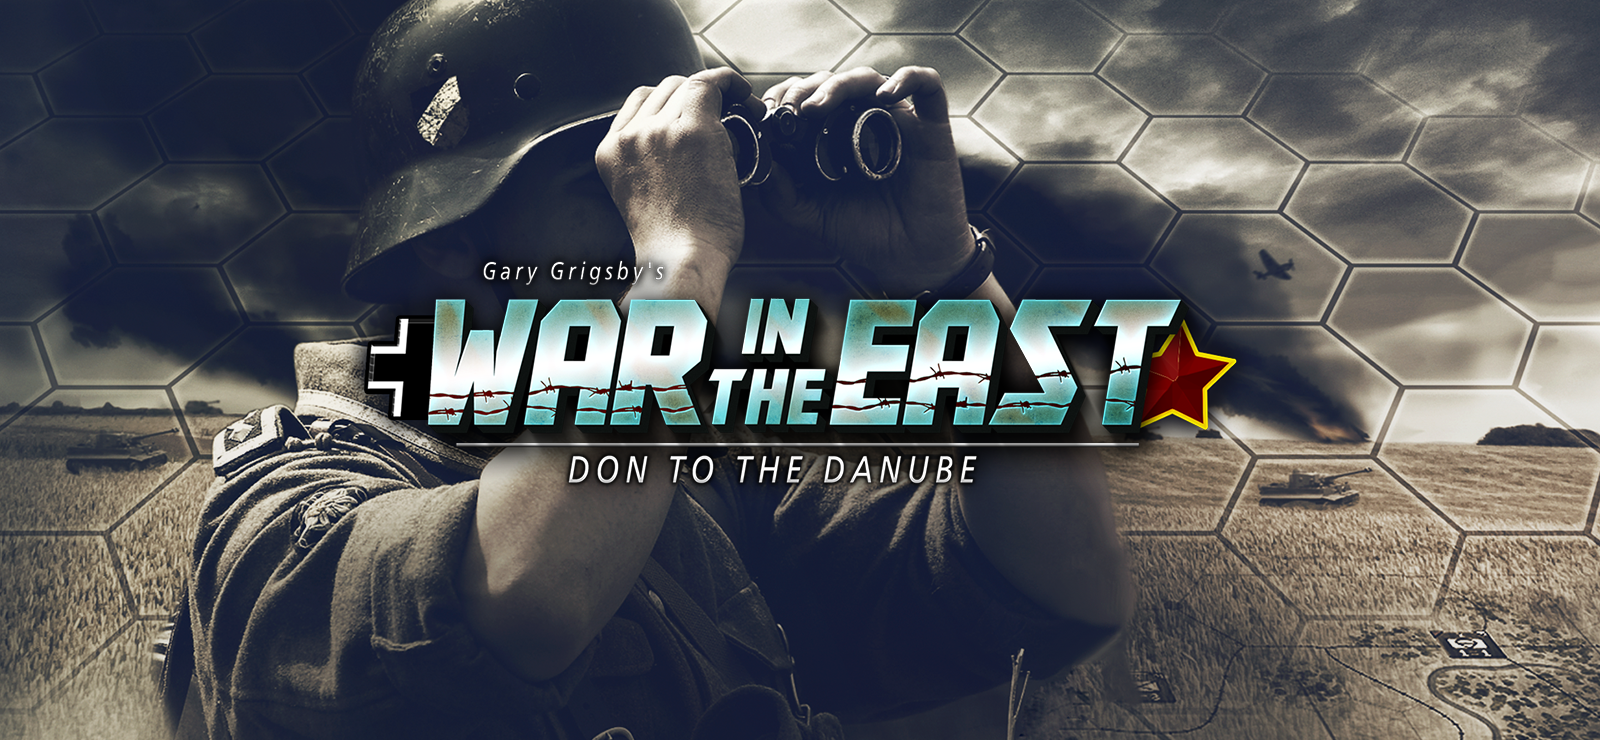 Gary Grigsby's War In The East: Don To The Danube